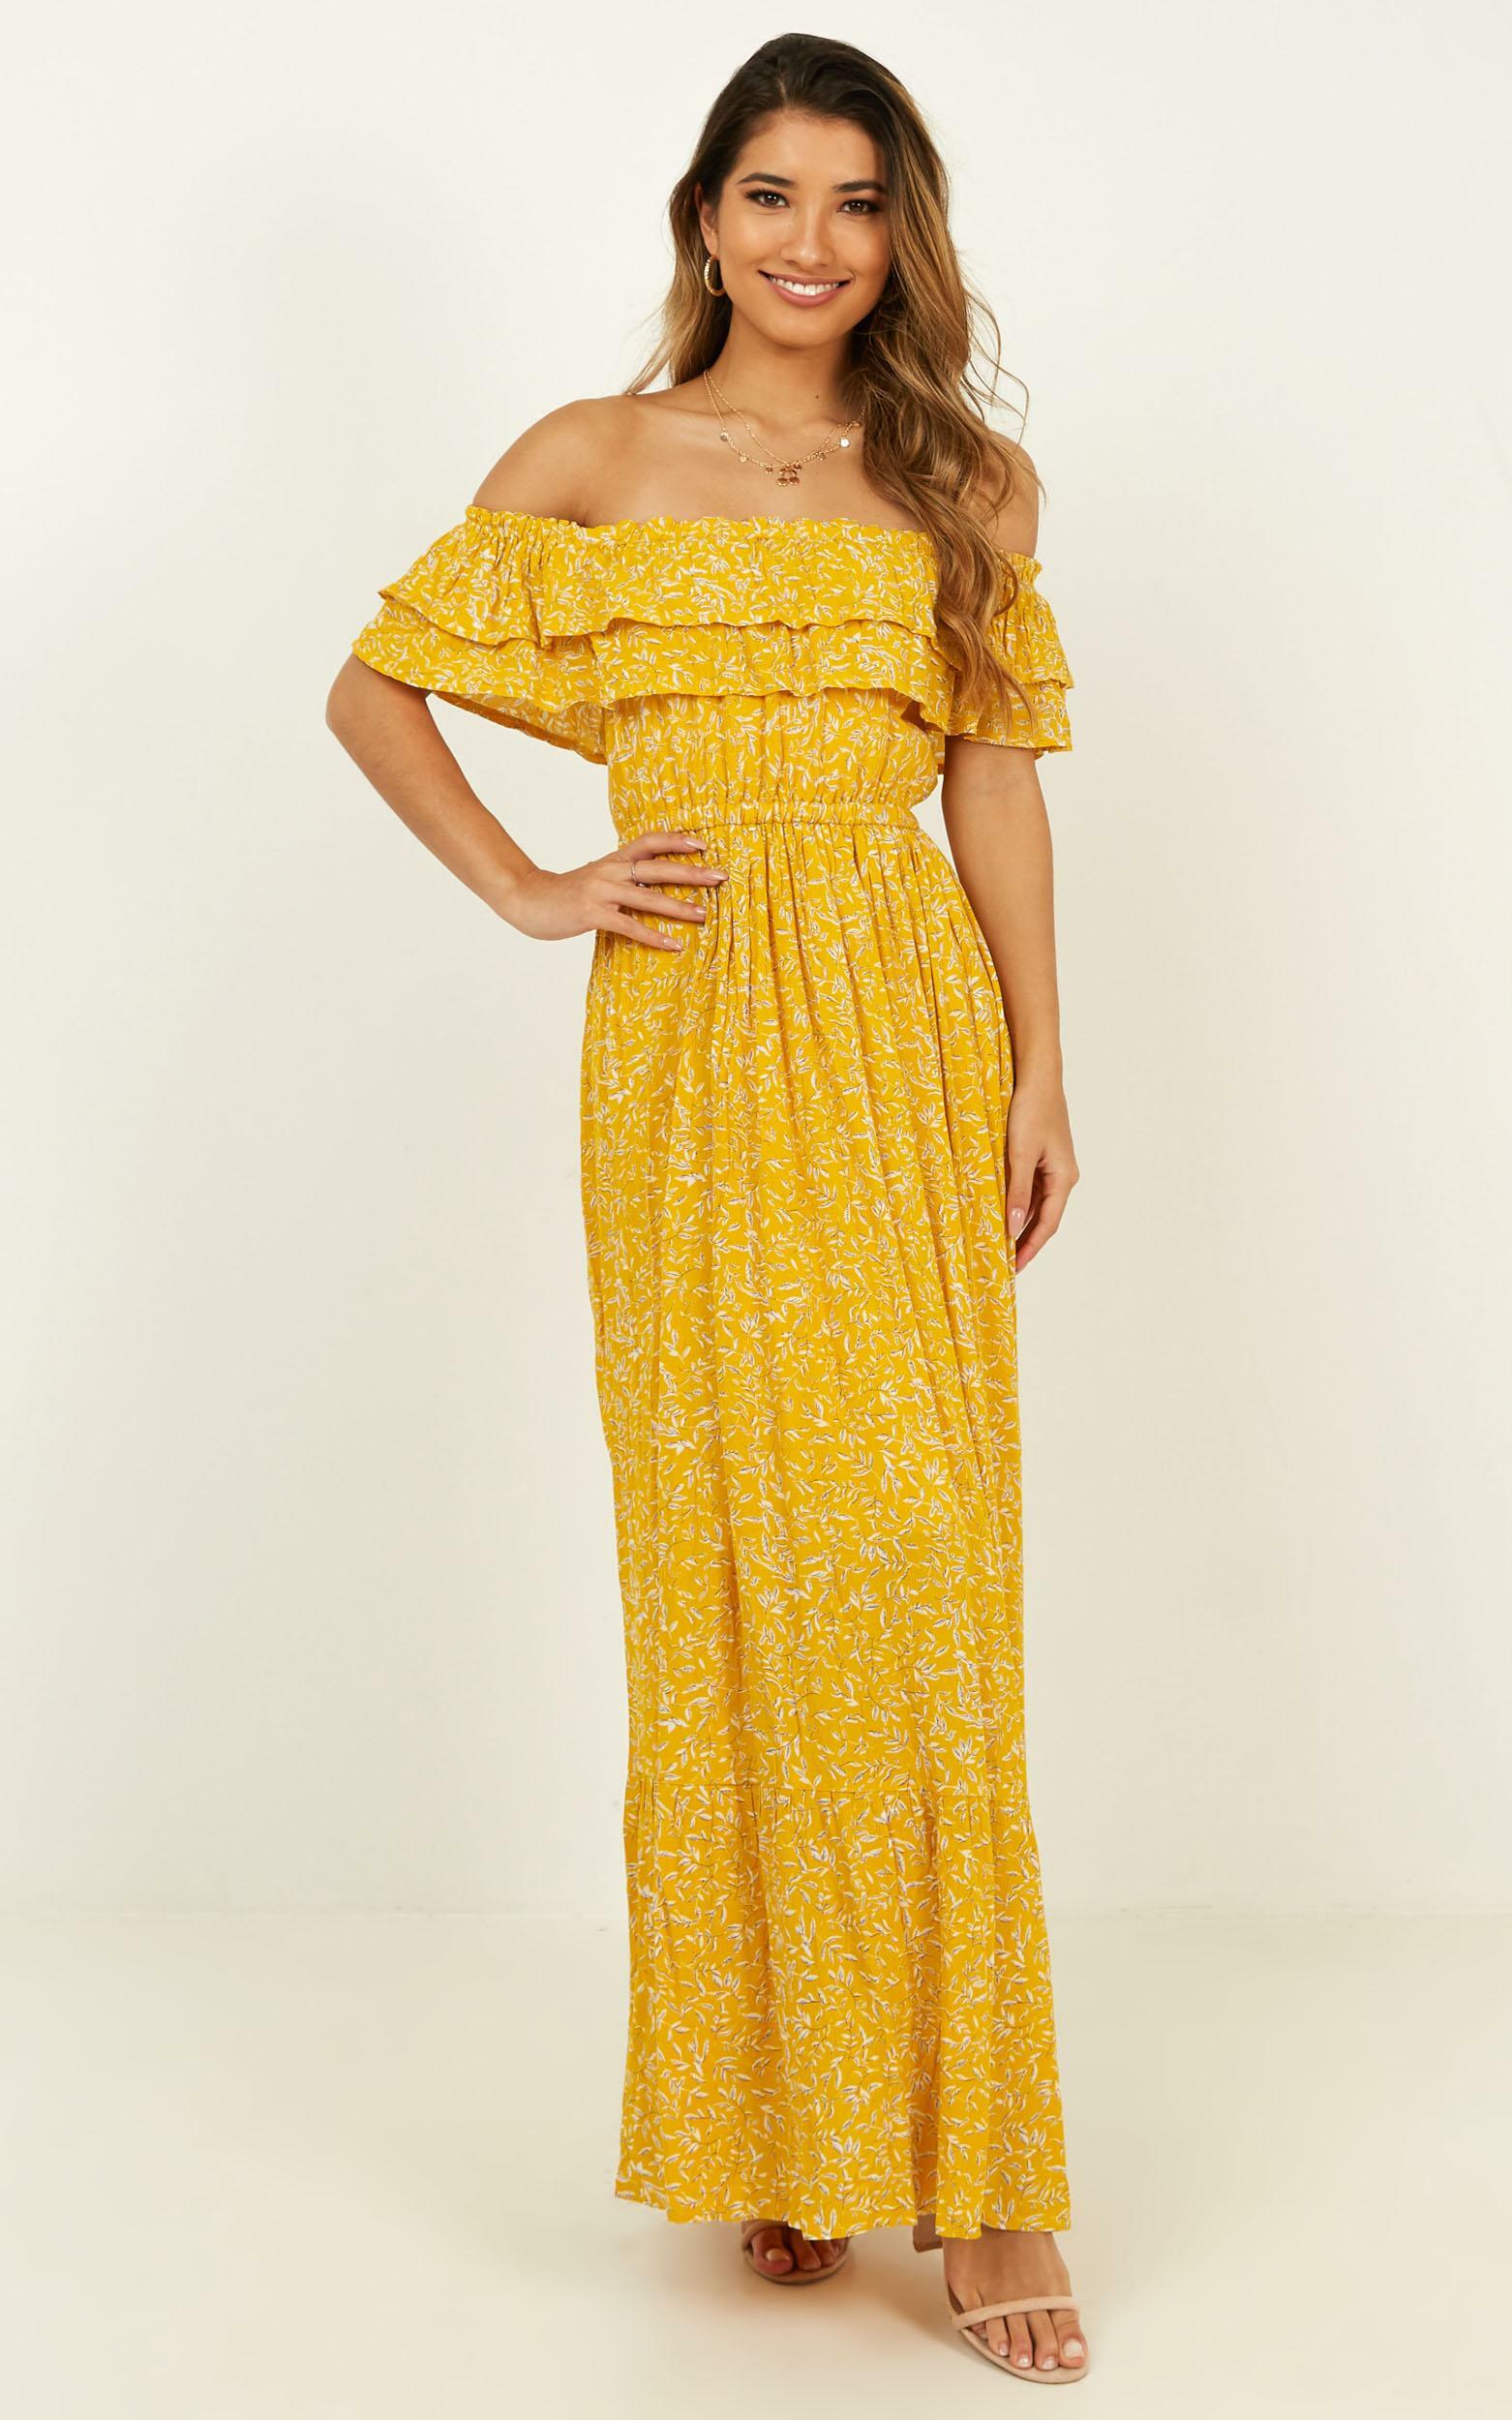 Notre Dame Off Shoulder Maxi Dress in Yellow Floral - 20, YEL5, hi-res image number null